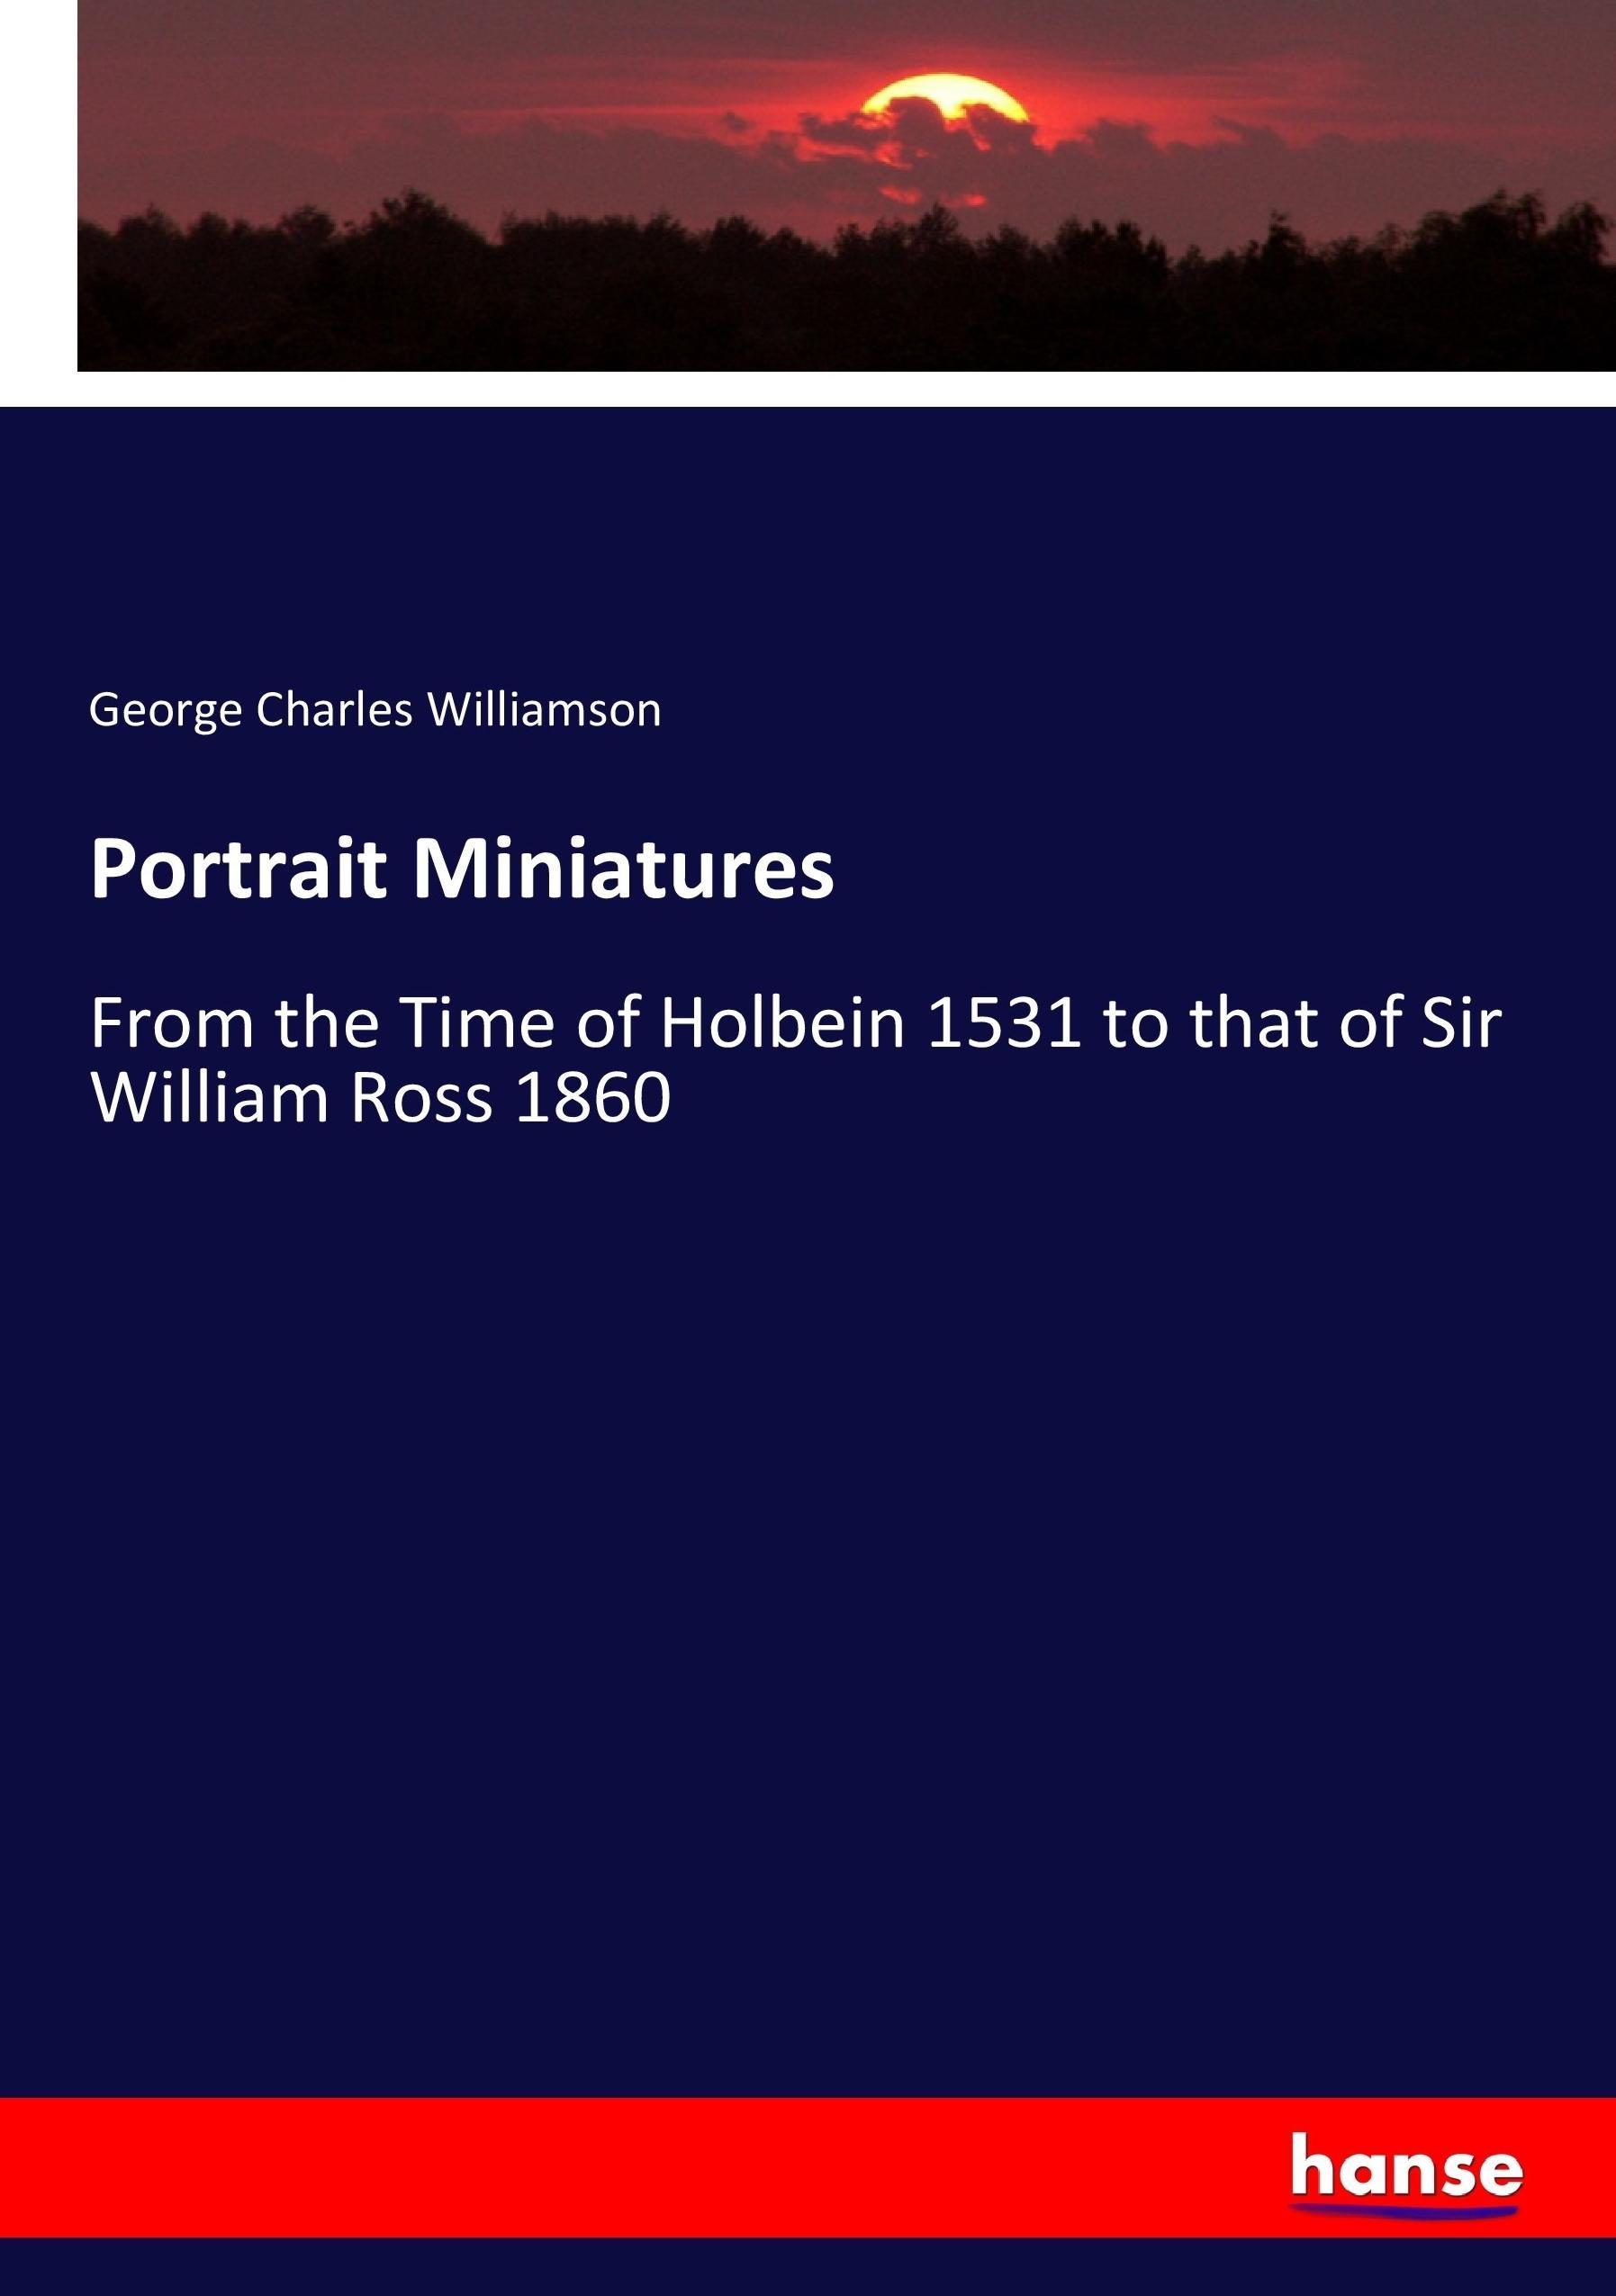 Portrait Miniatures | From the Time of Holbein 1531 to that of Sir William Ross 1860 | George Charles Williamson | Taschenbuch | Paperback | 404 S. | Englisch | 2017 | hansebooks | EAN 9783744723718 - Williamson, George Charles